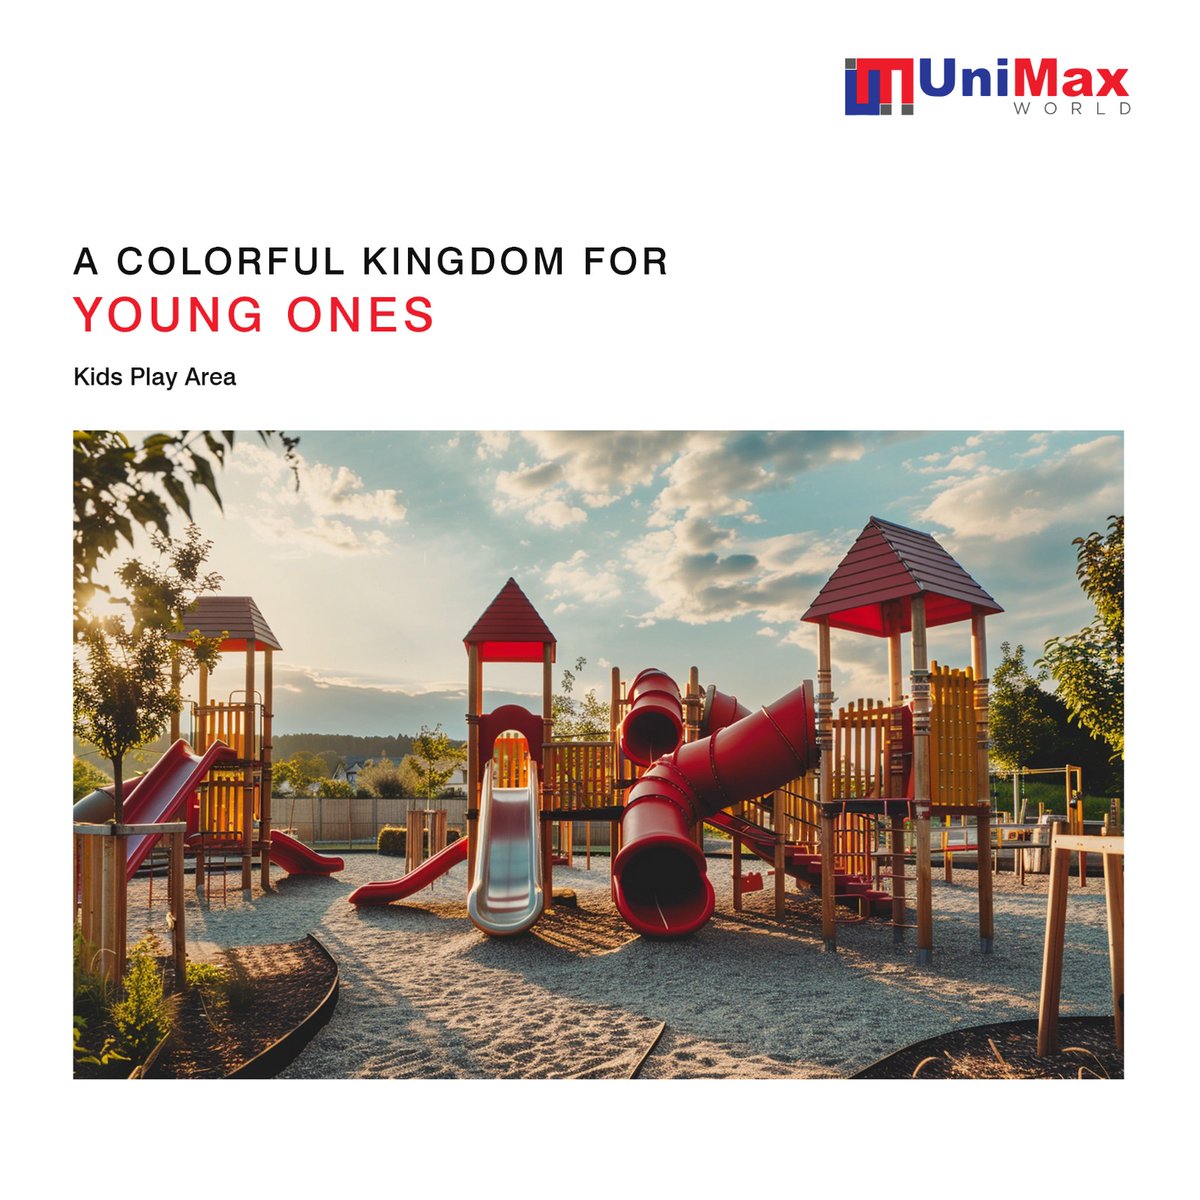 Our kingdom is a playground of endless excitement, where every shade invites laughter and infinite exploration!

#UnimaxWorld #KingdomOfExcitement #EndlessFun #InvitingLaughter #InfiniteExploration #PlaygroundAdventure #FamilyFun #ExperienceJoy